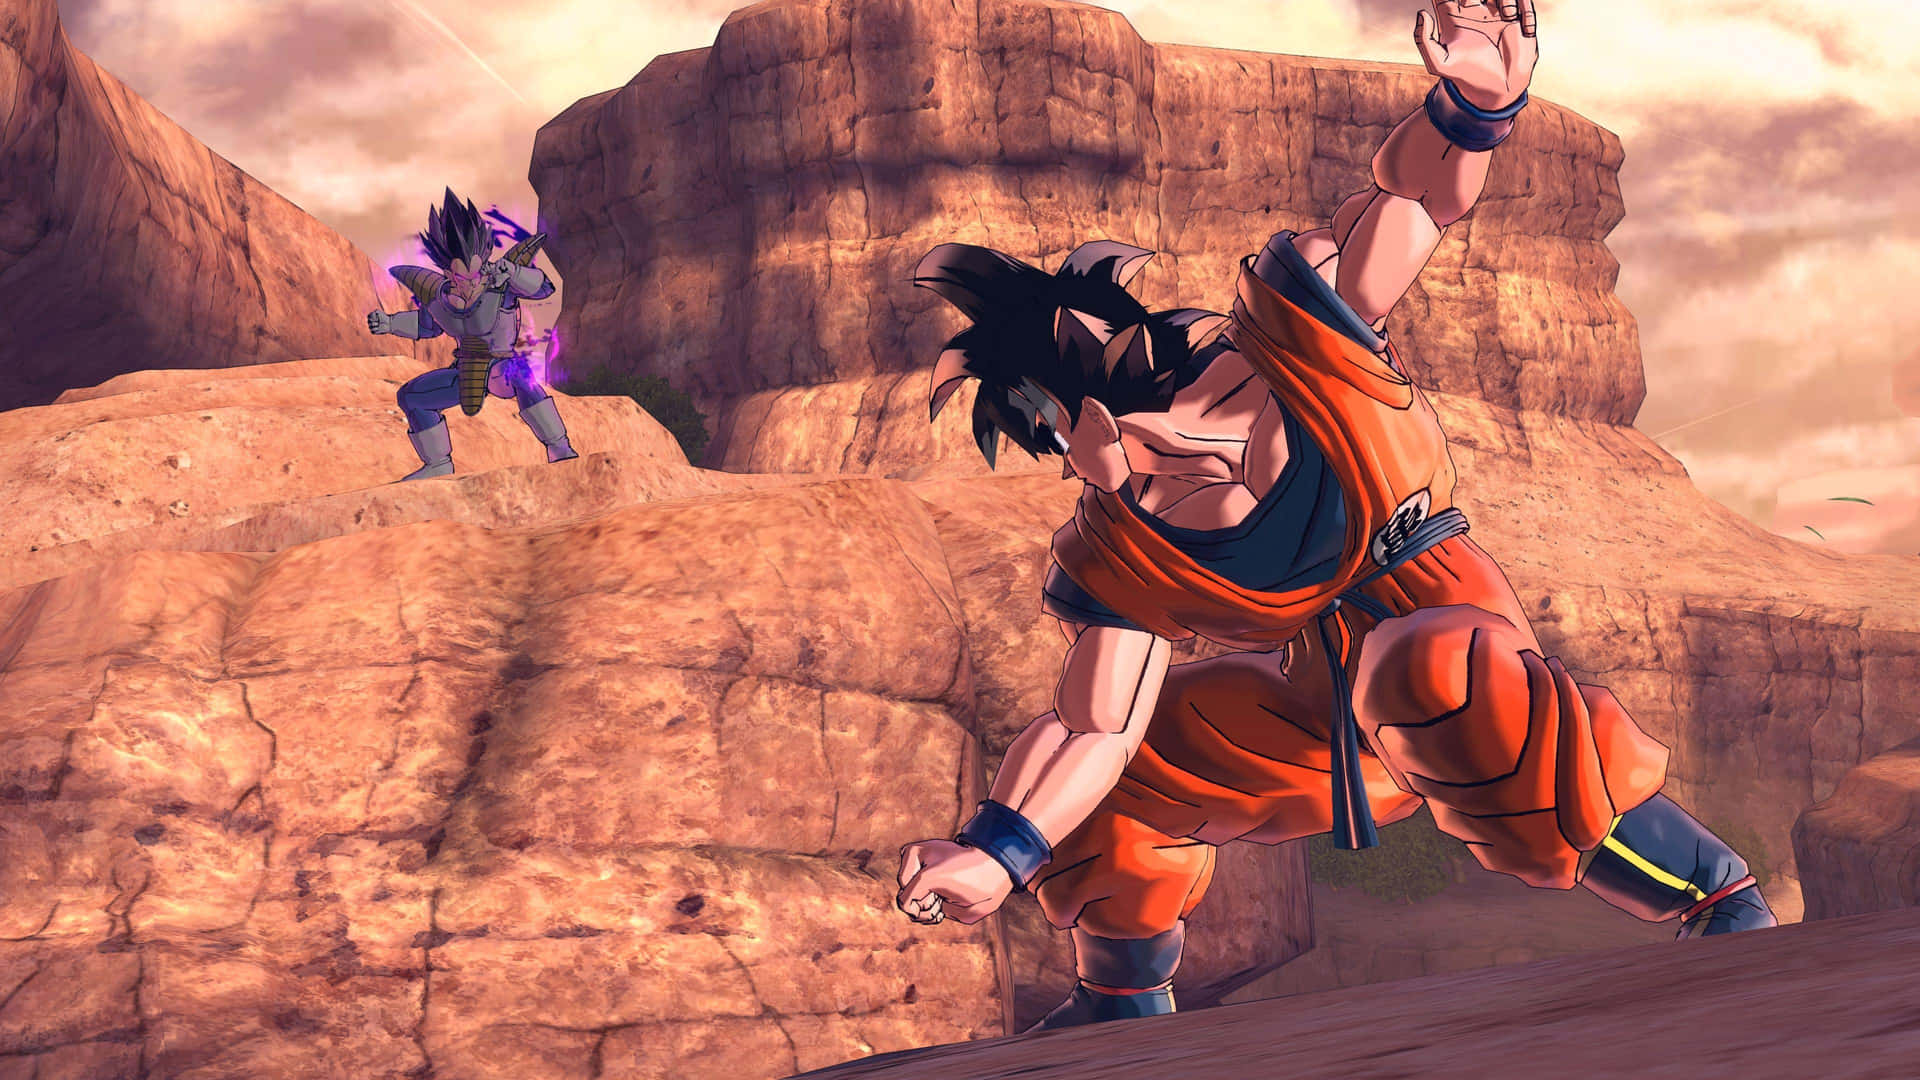 Create your own character and relive epic battles in Dragon Ball Xenoverse! Wallpaper